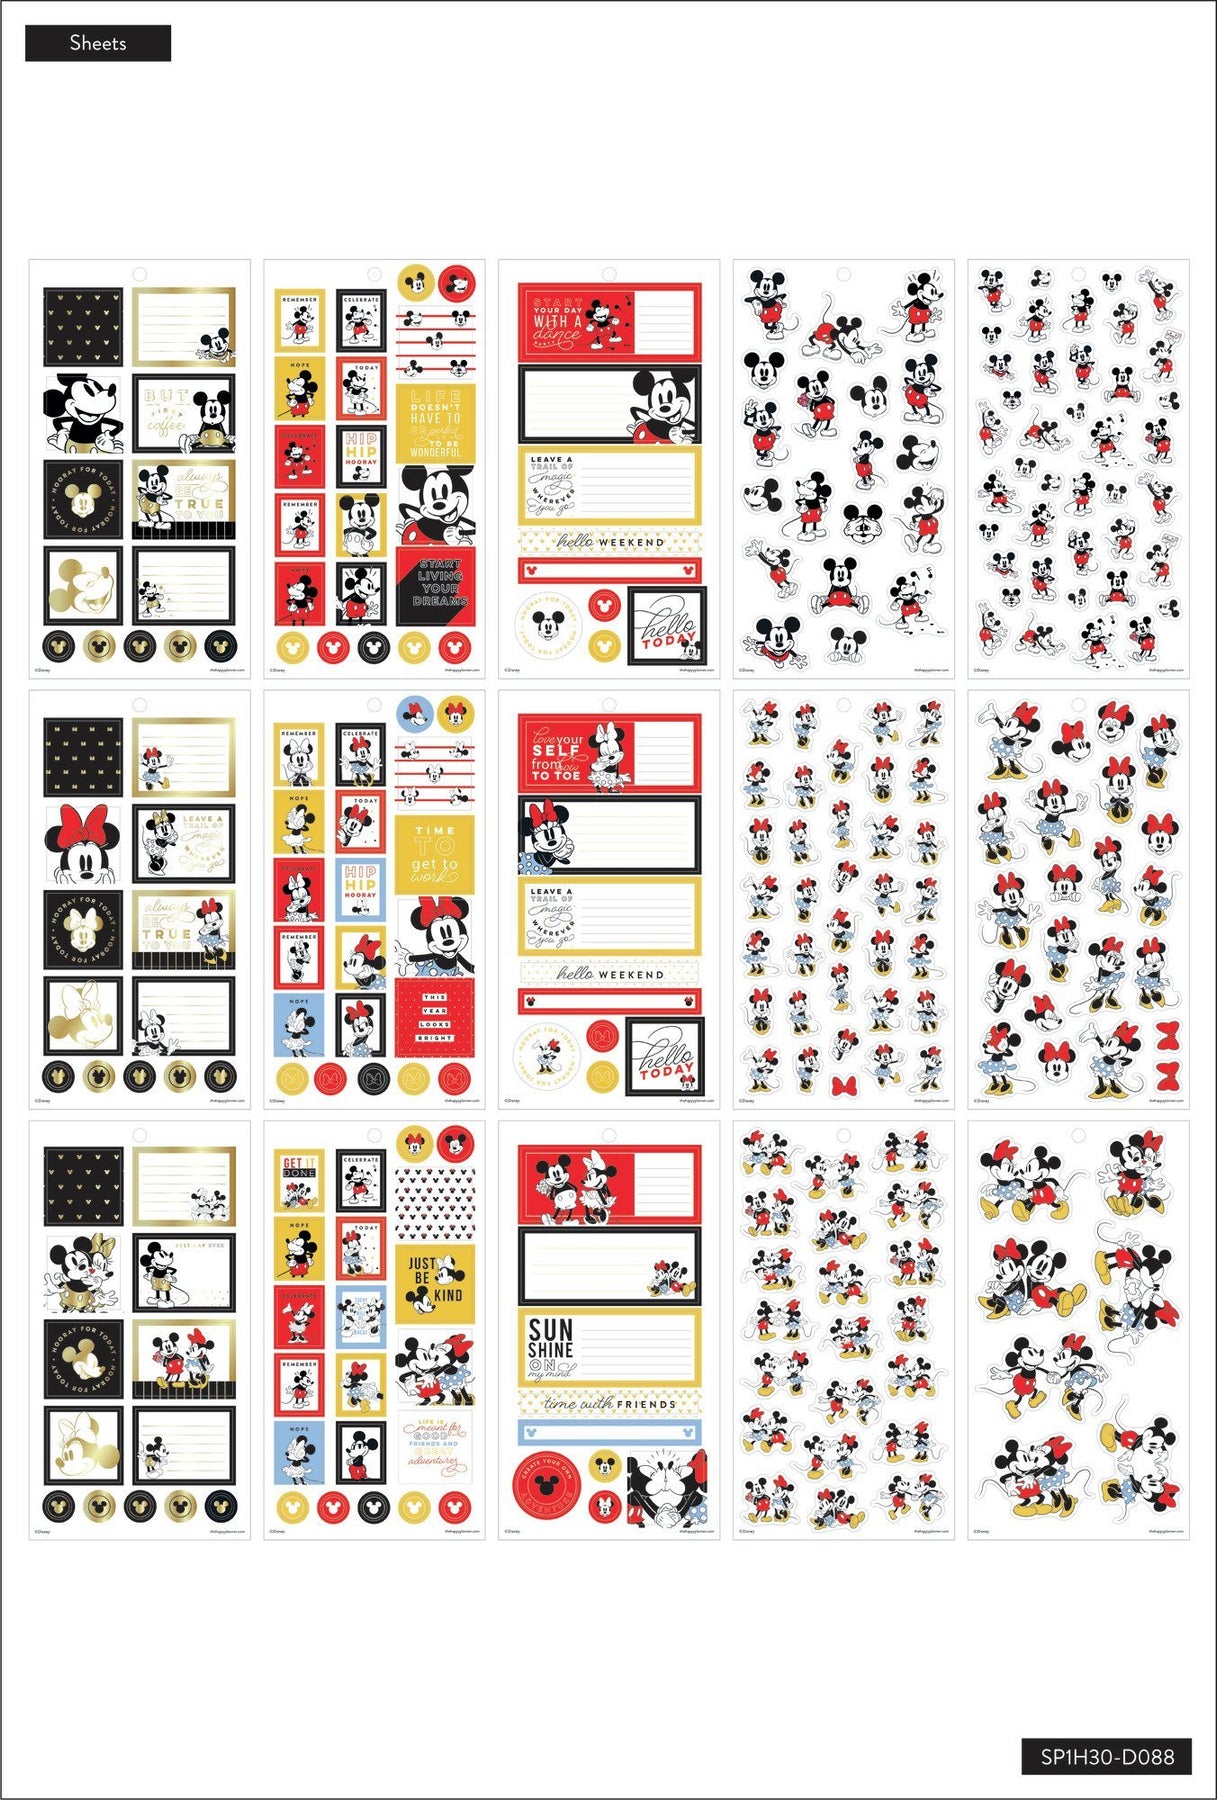 The Happy Planner, Disney, Mickey & Friends Value Pack Stickers- Better  Together, 8 x 4.75 x 9